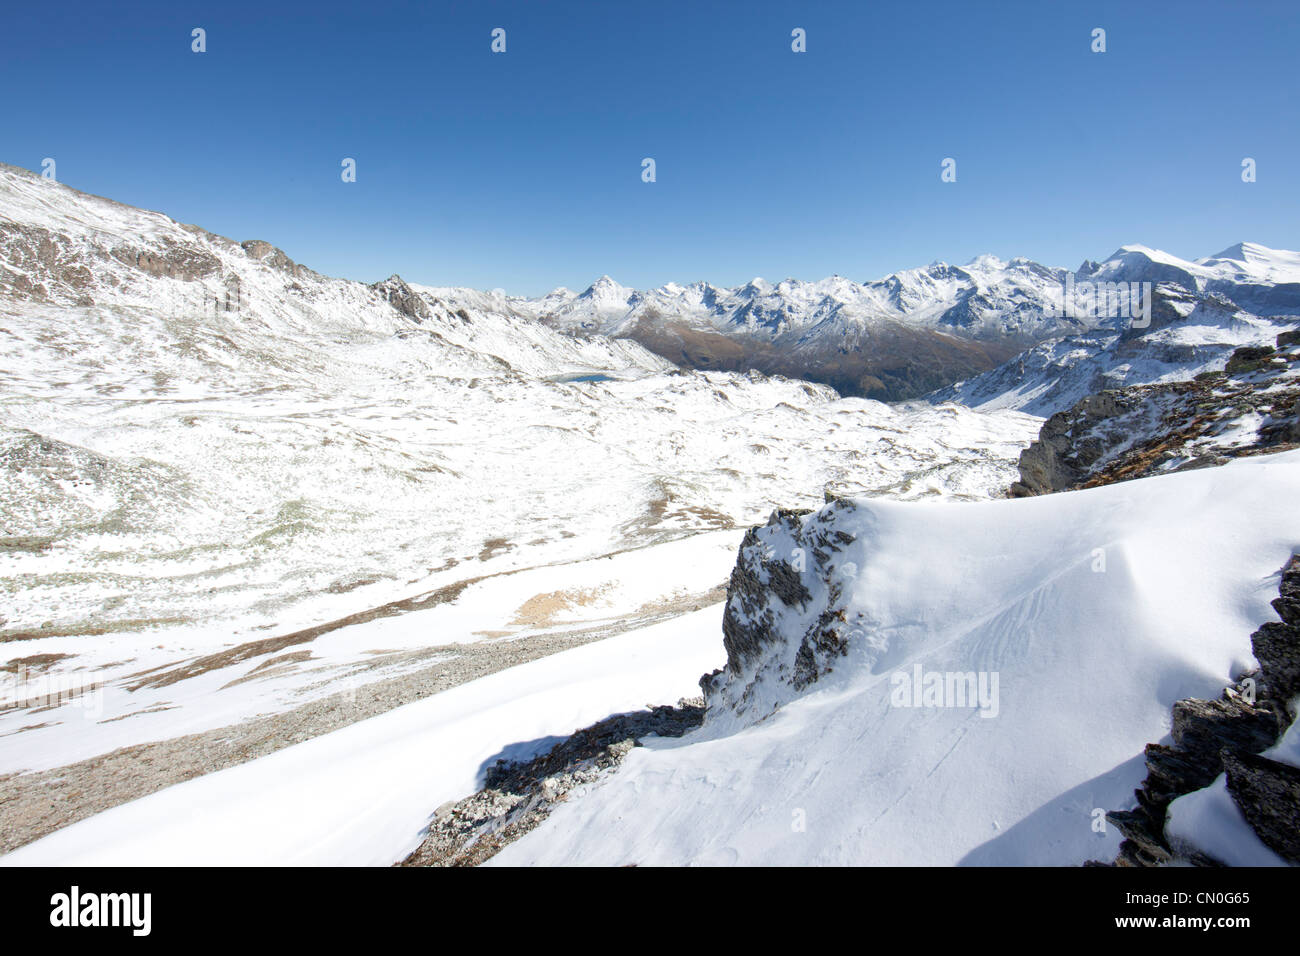 Switzerland, Haute route, view from the summit of the Meidpass (2709m) looking East with snow capped Alps. Stock Photo